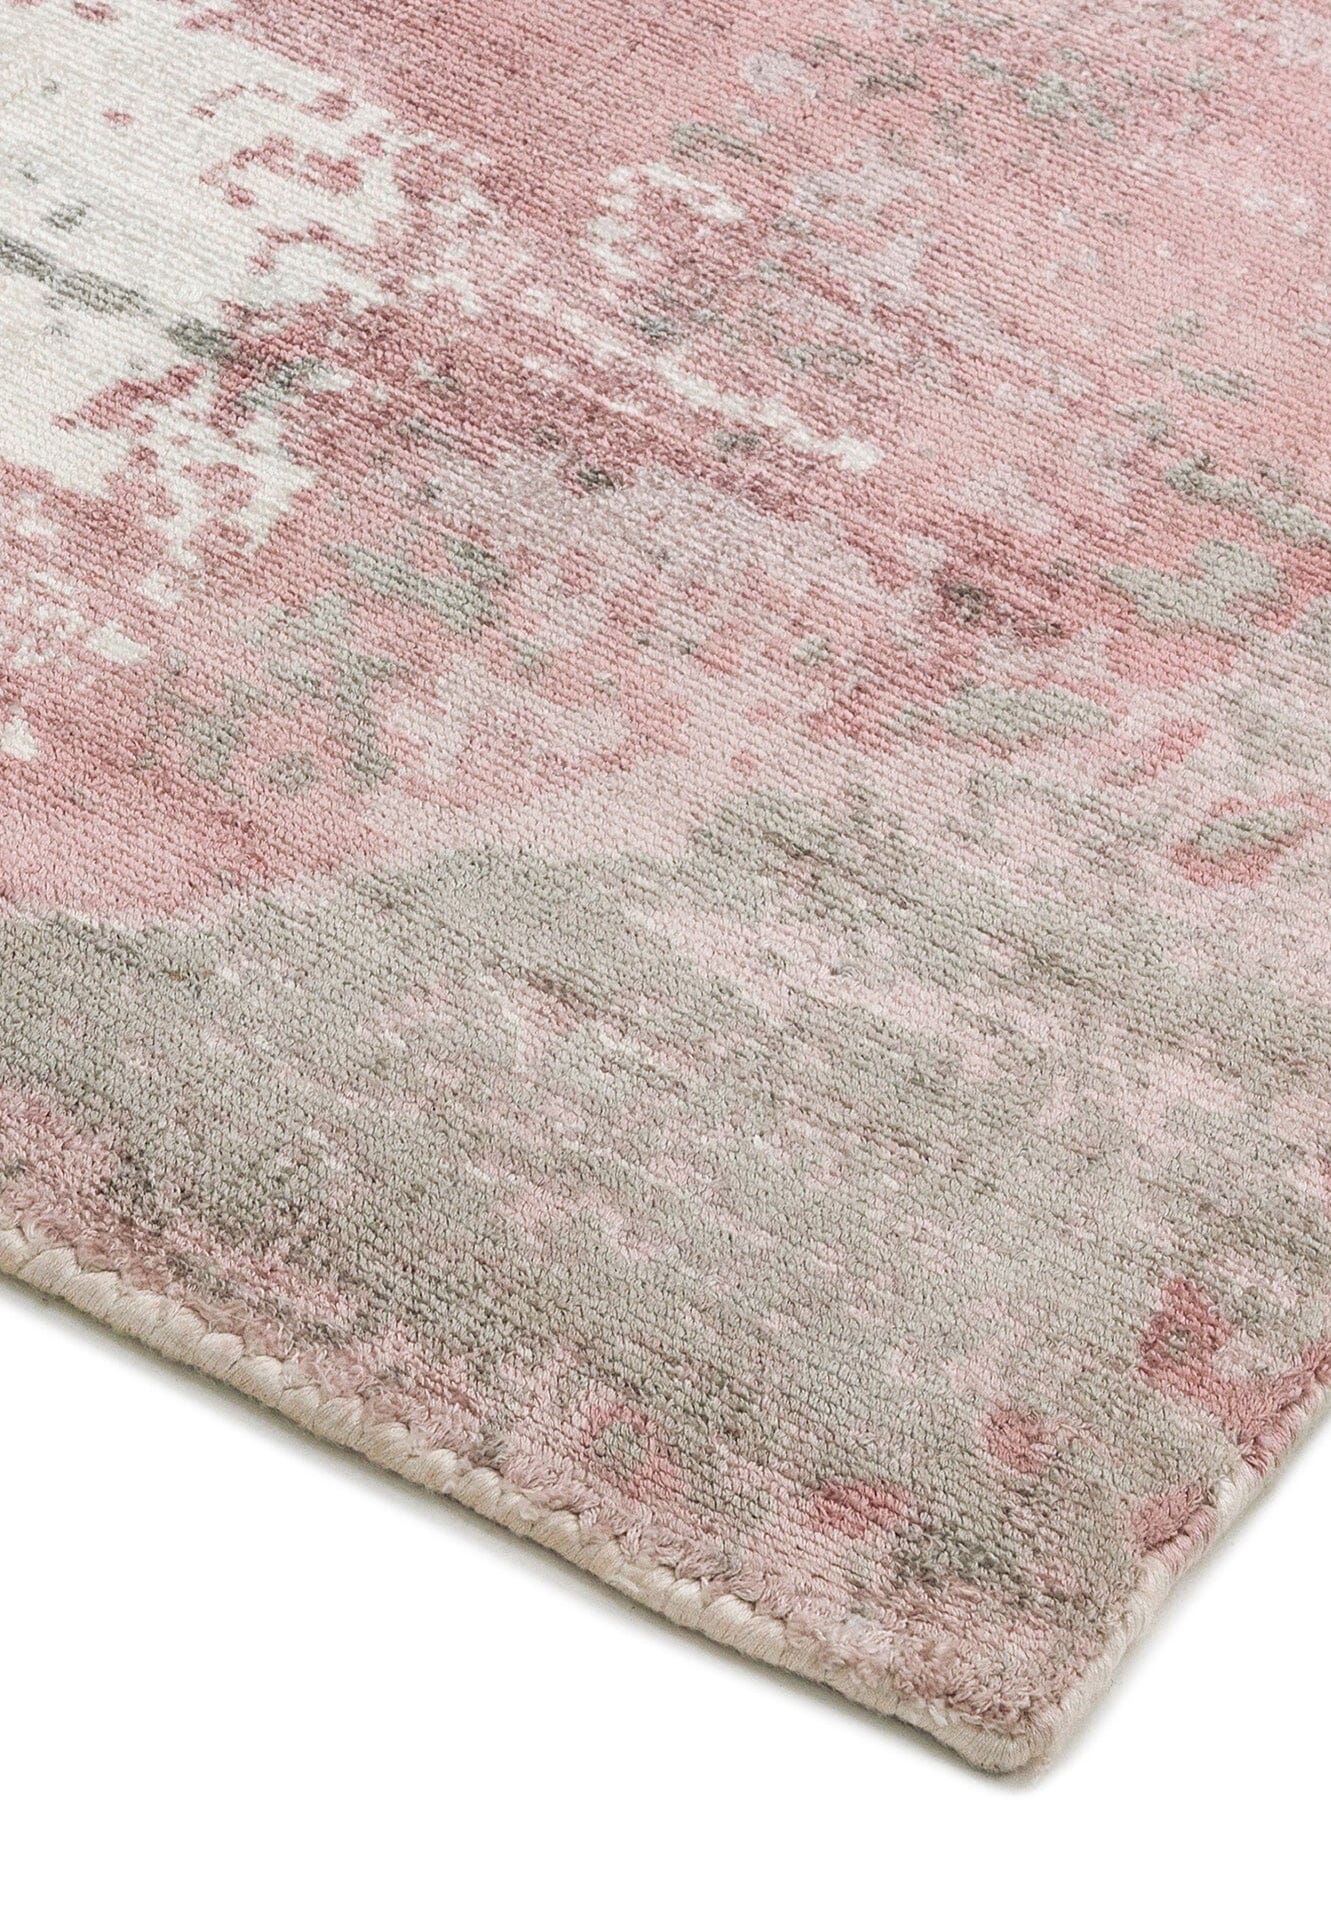  Asiatic Carpets-Asiatic Carpets Gatsby Hand Woven Rug Blush - 120 x 170cm-Pink 573 